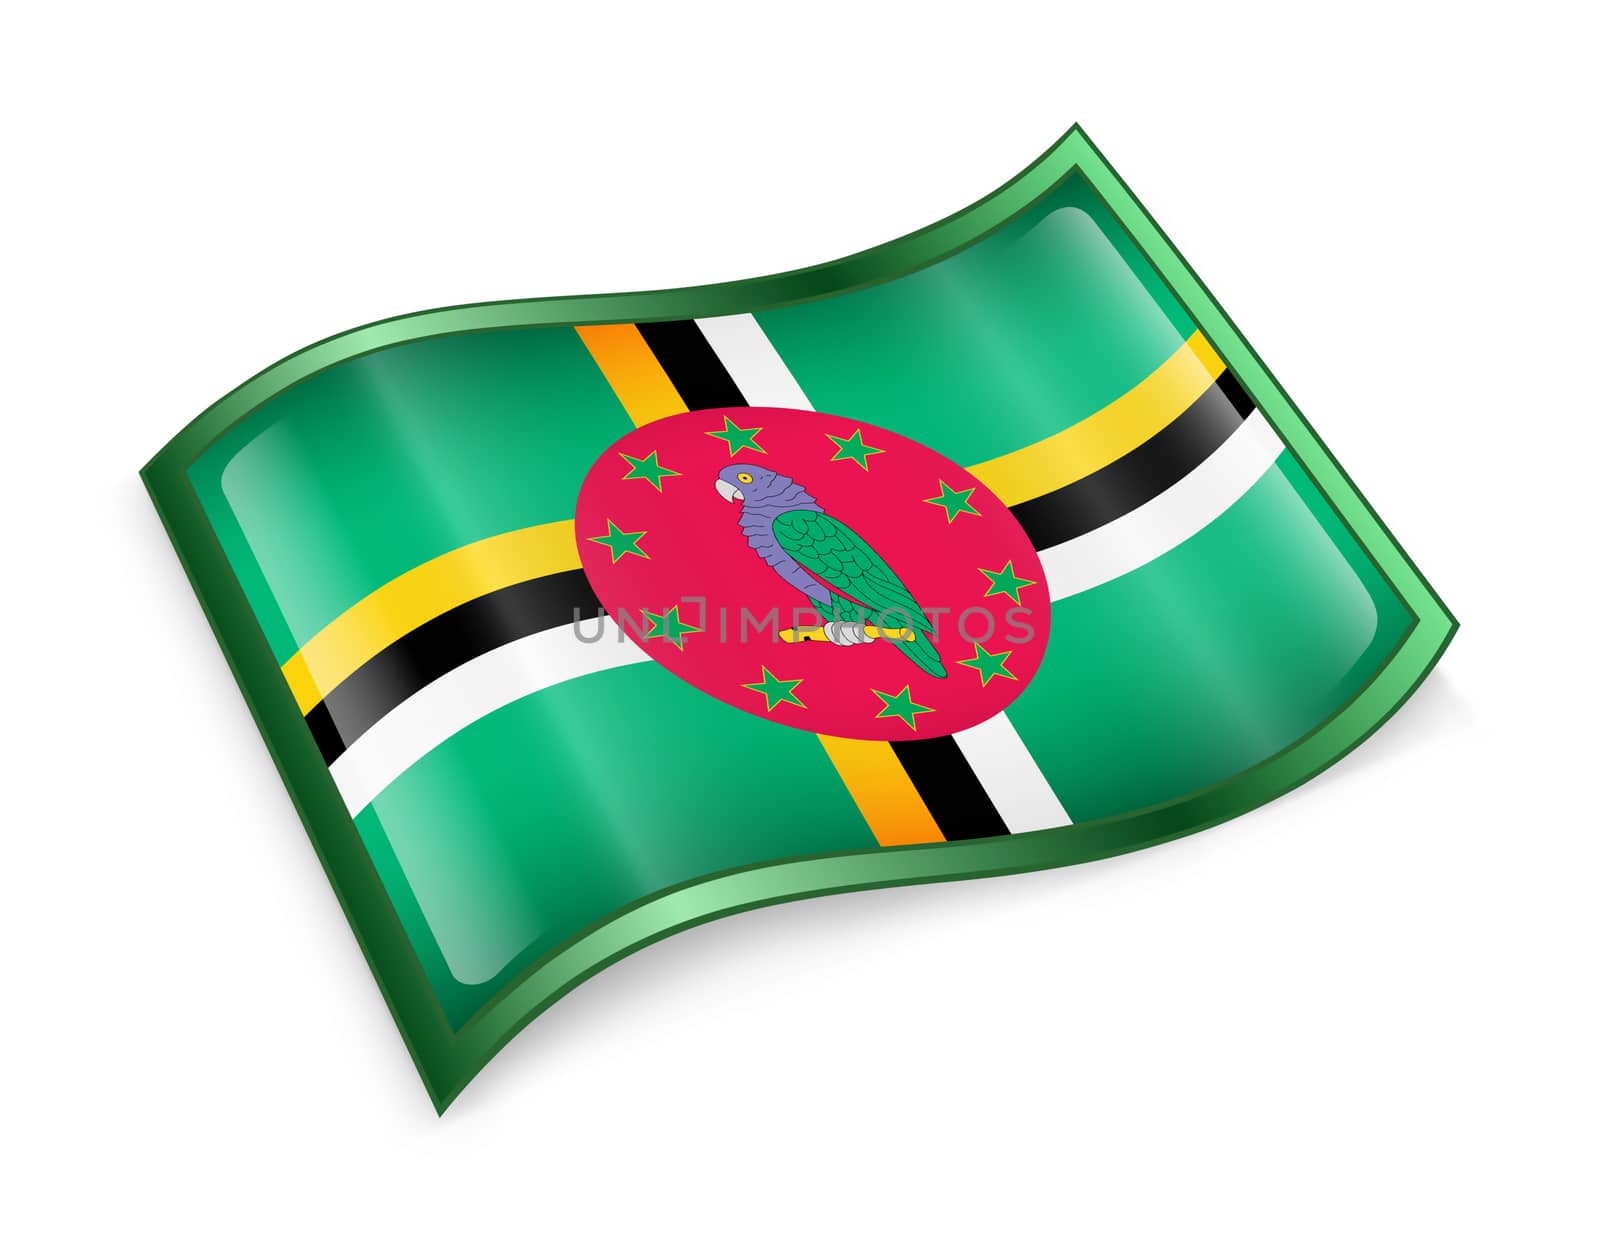 Dominica flag icon, isolated on white background